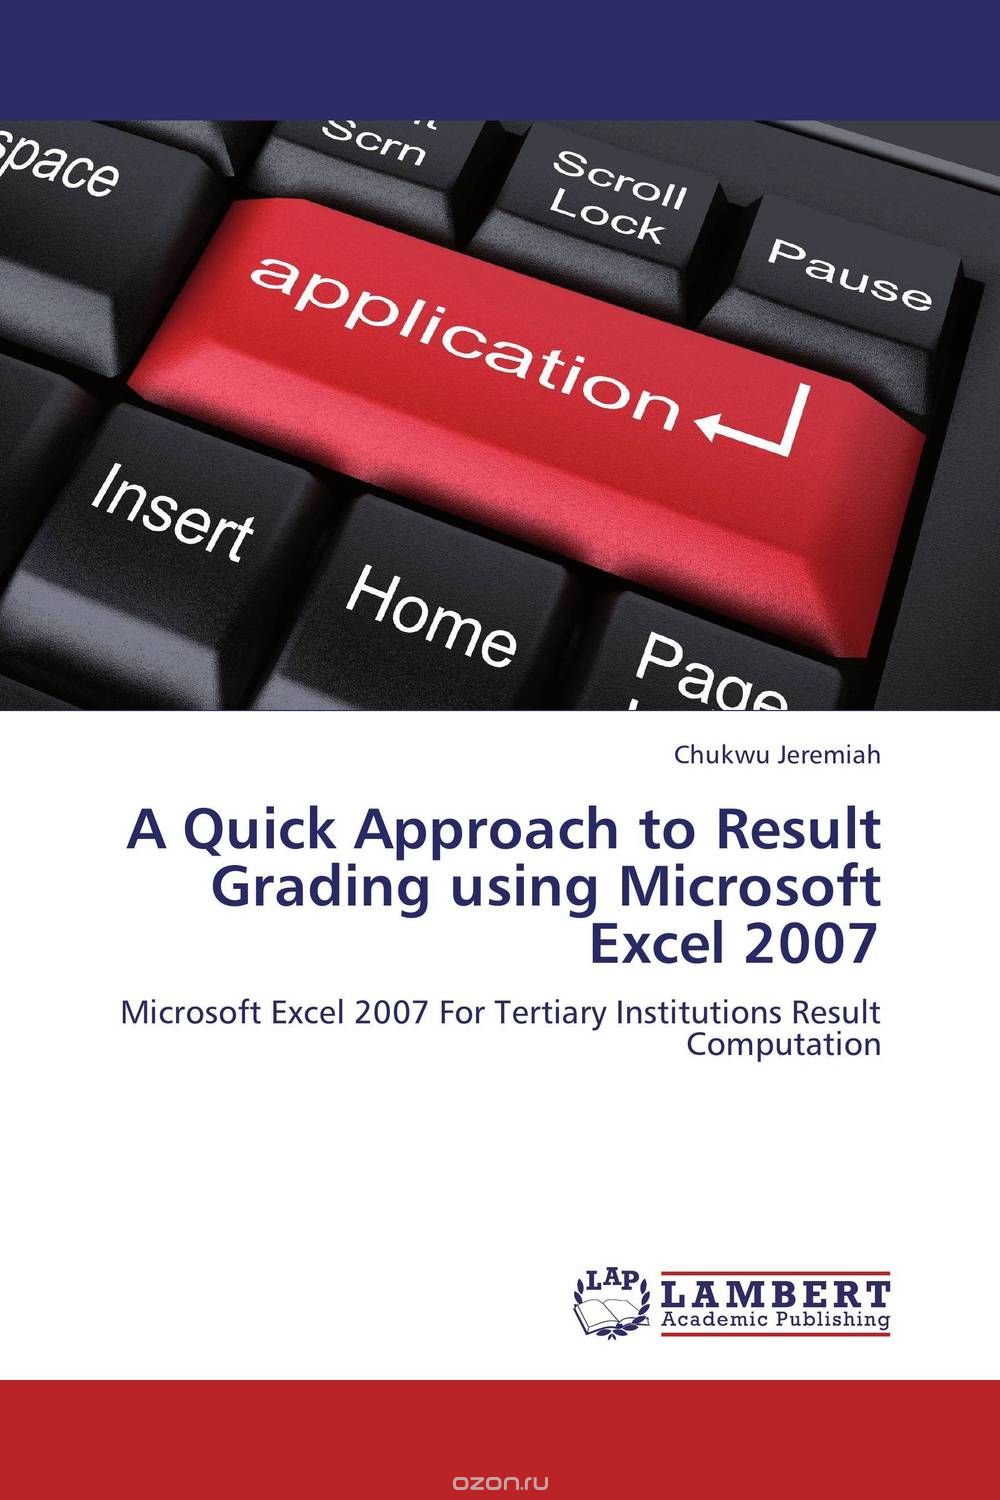 A Quick Approach to Result Grading using Microsoft Excel 2007